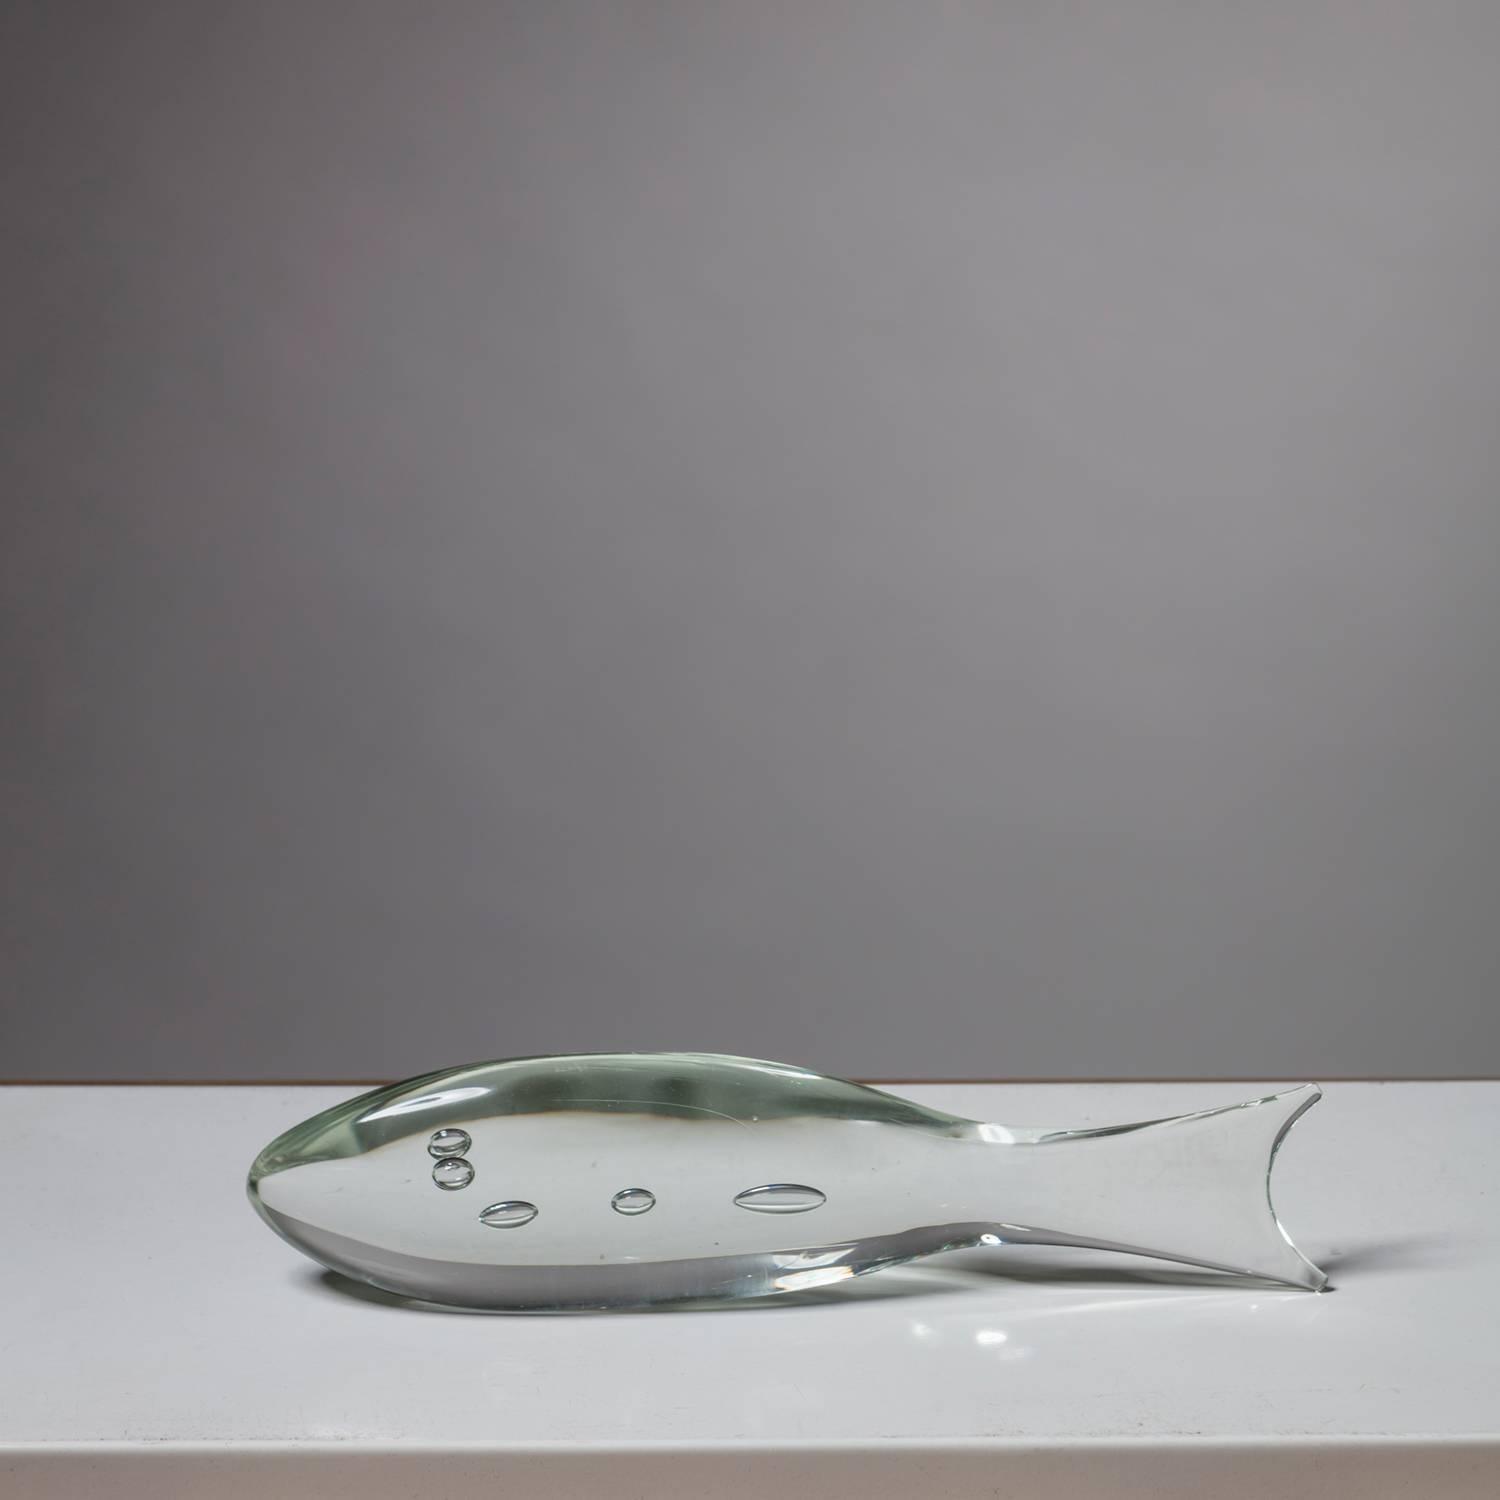 Murano glass fish by Cenedese.
Solid glass lean shape with bubbles.